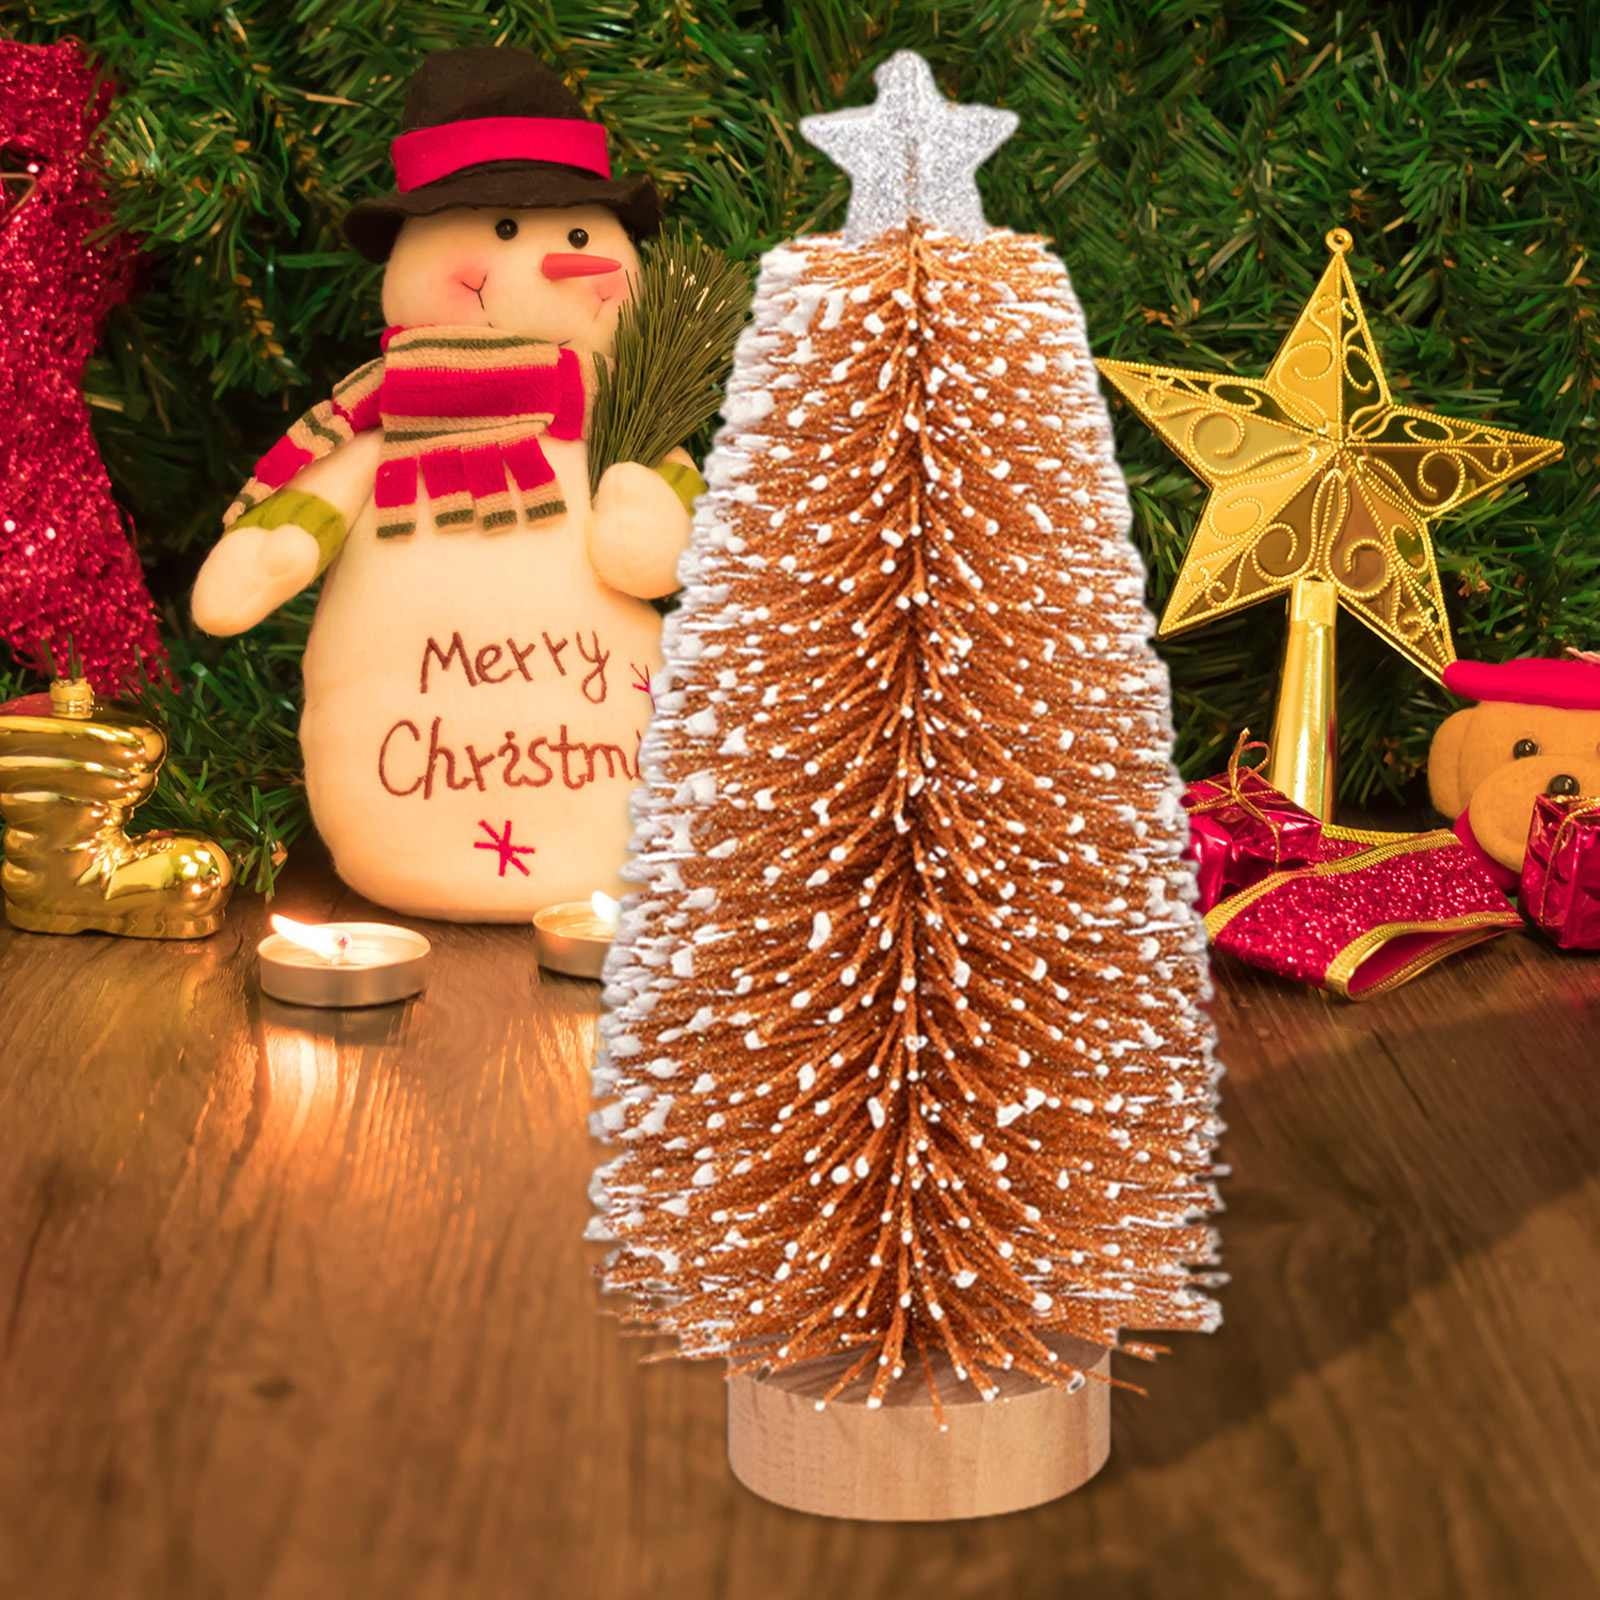 RBCKVXZ Christmas Decorations Under $5.00 Clearance, Christmas Tree  Christmas Decoration Decorations Christmas Tree Desktop Decoration,  8.27Inch